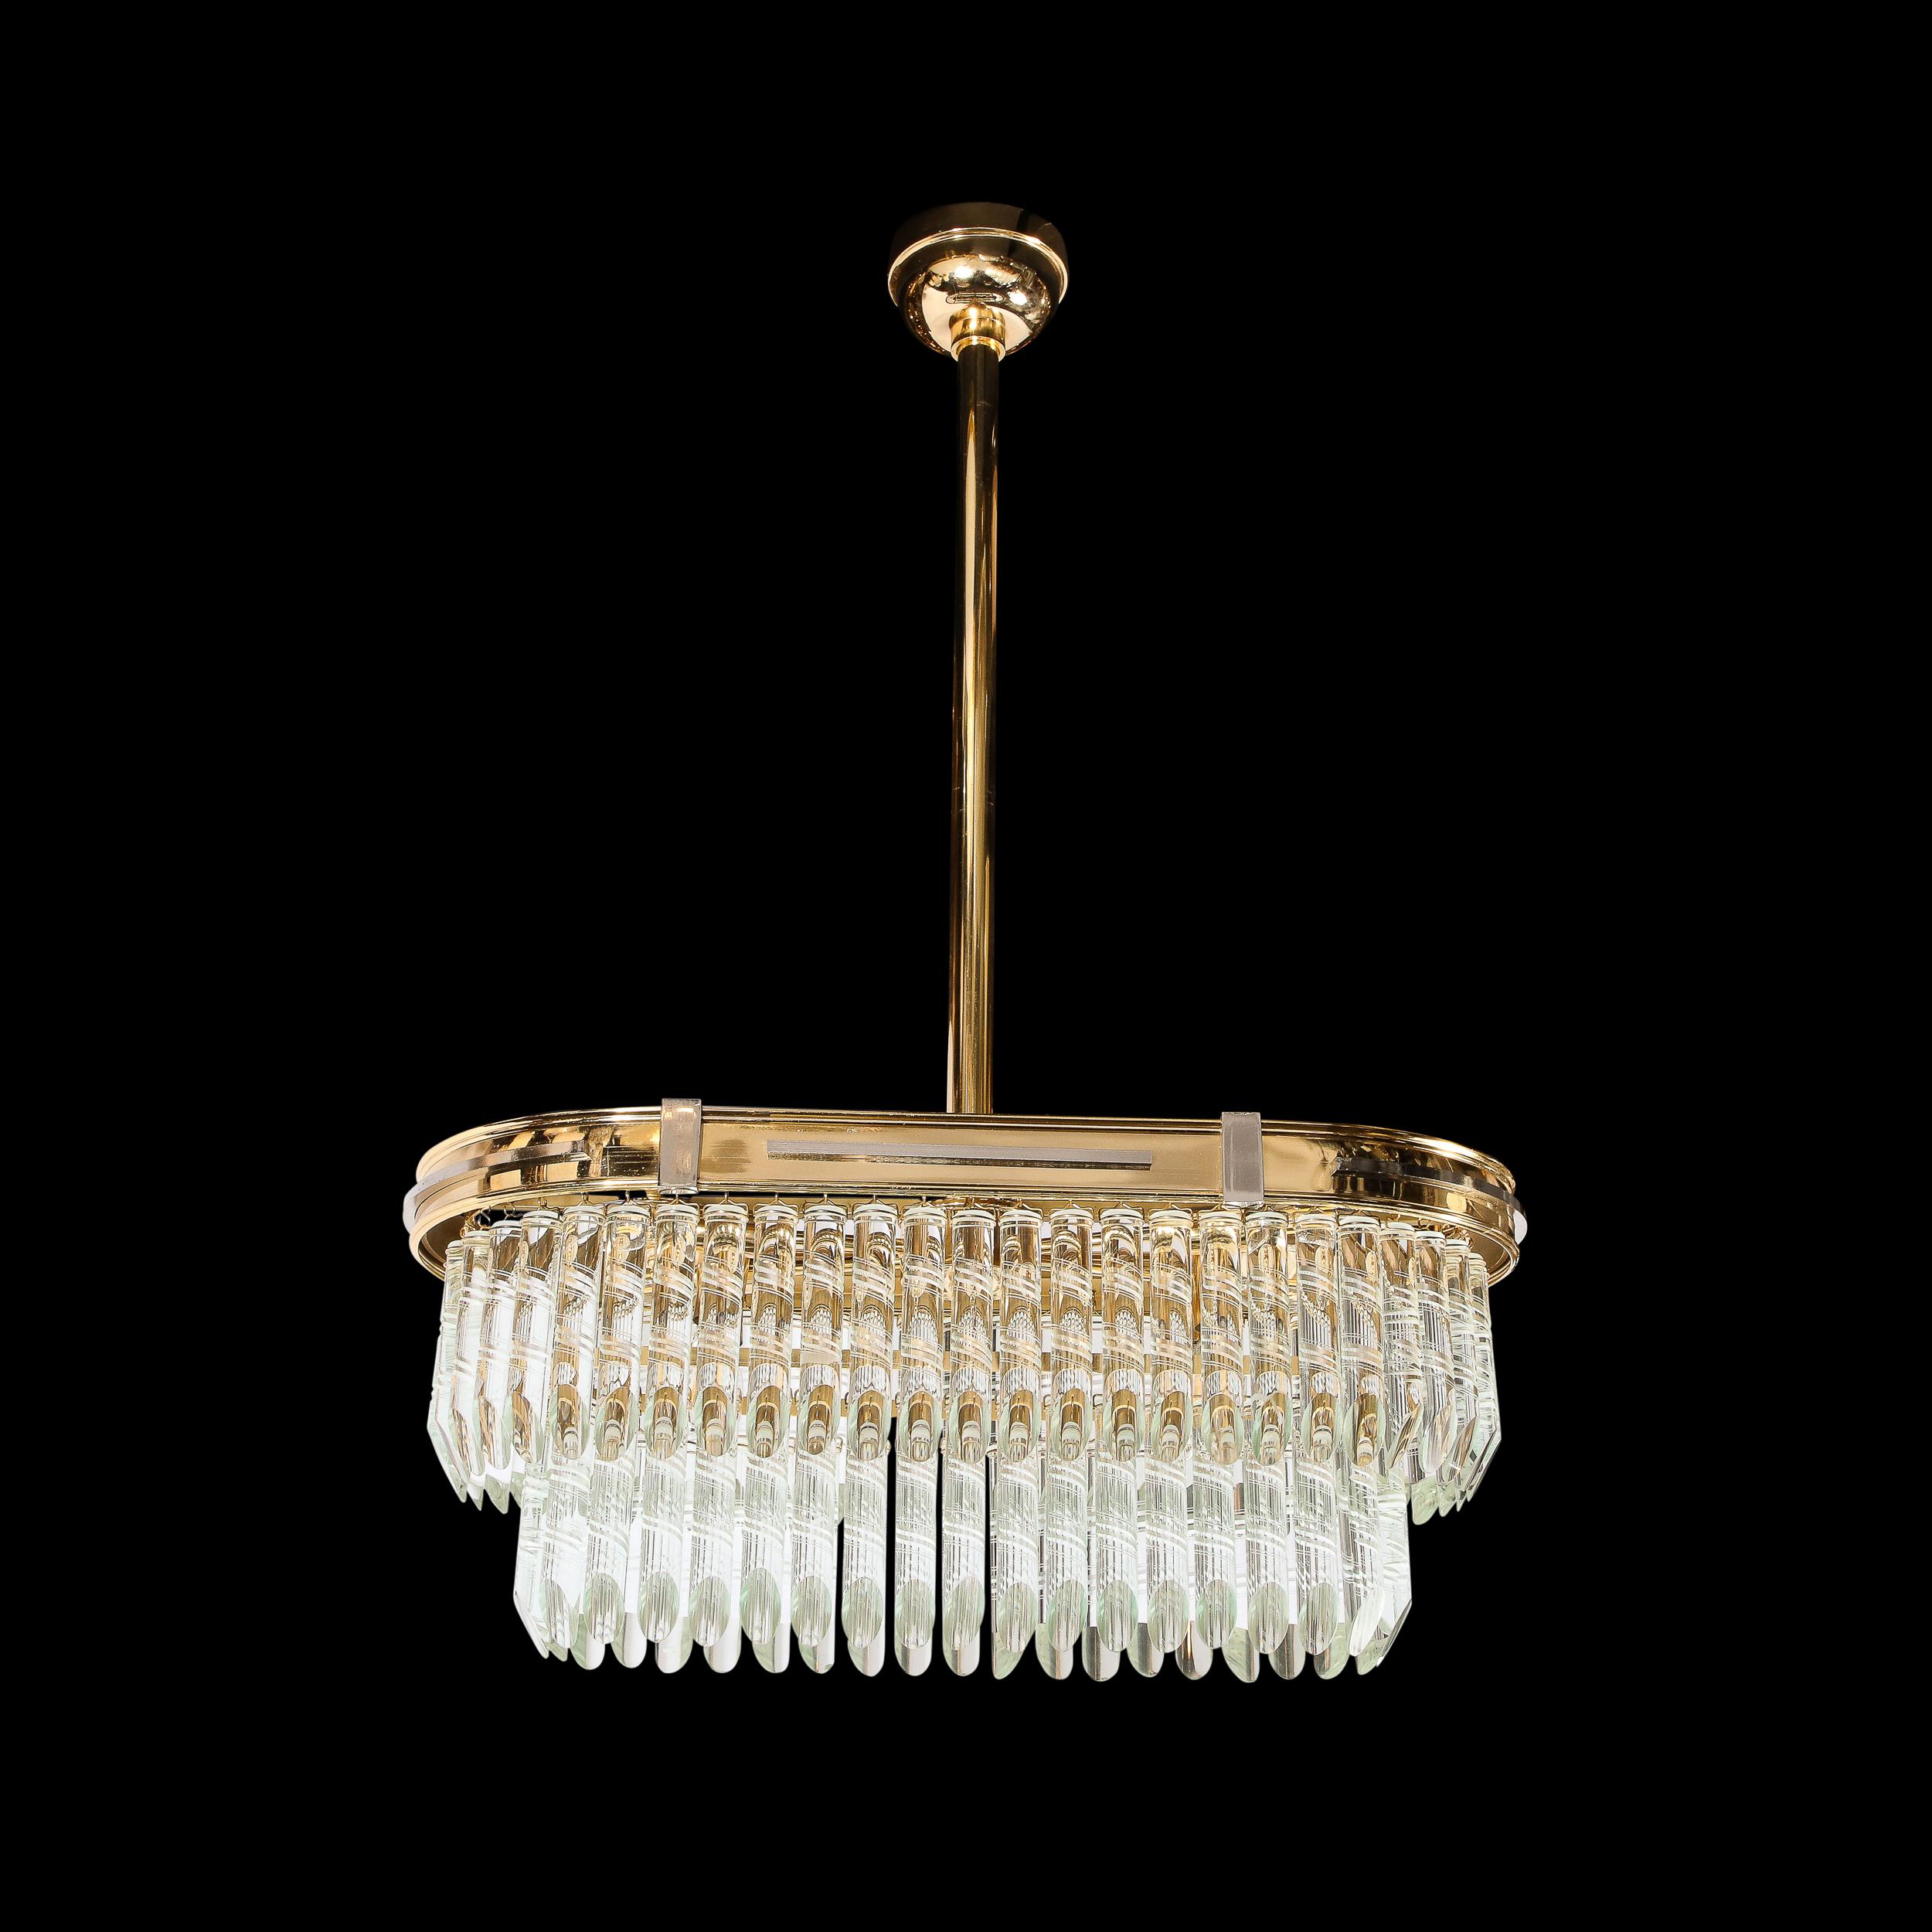 The chandelier originates from Italy circa 1970. Features an oblong geometric frame composed in polished brass, with rectilinear nickel detailing, cleverly, placed within the frame and rewarding further viewing and detailed observation, hanging from